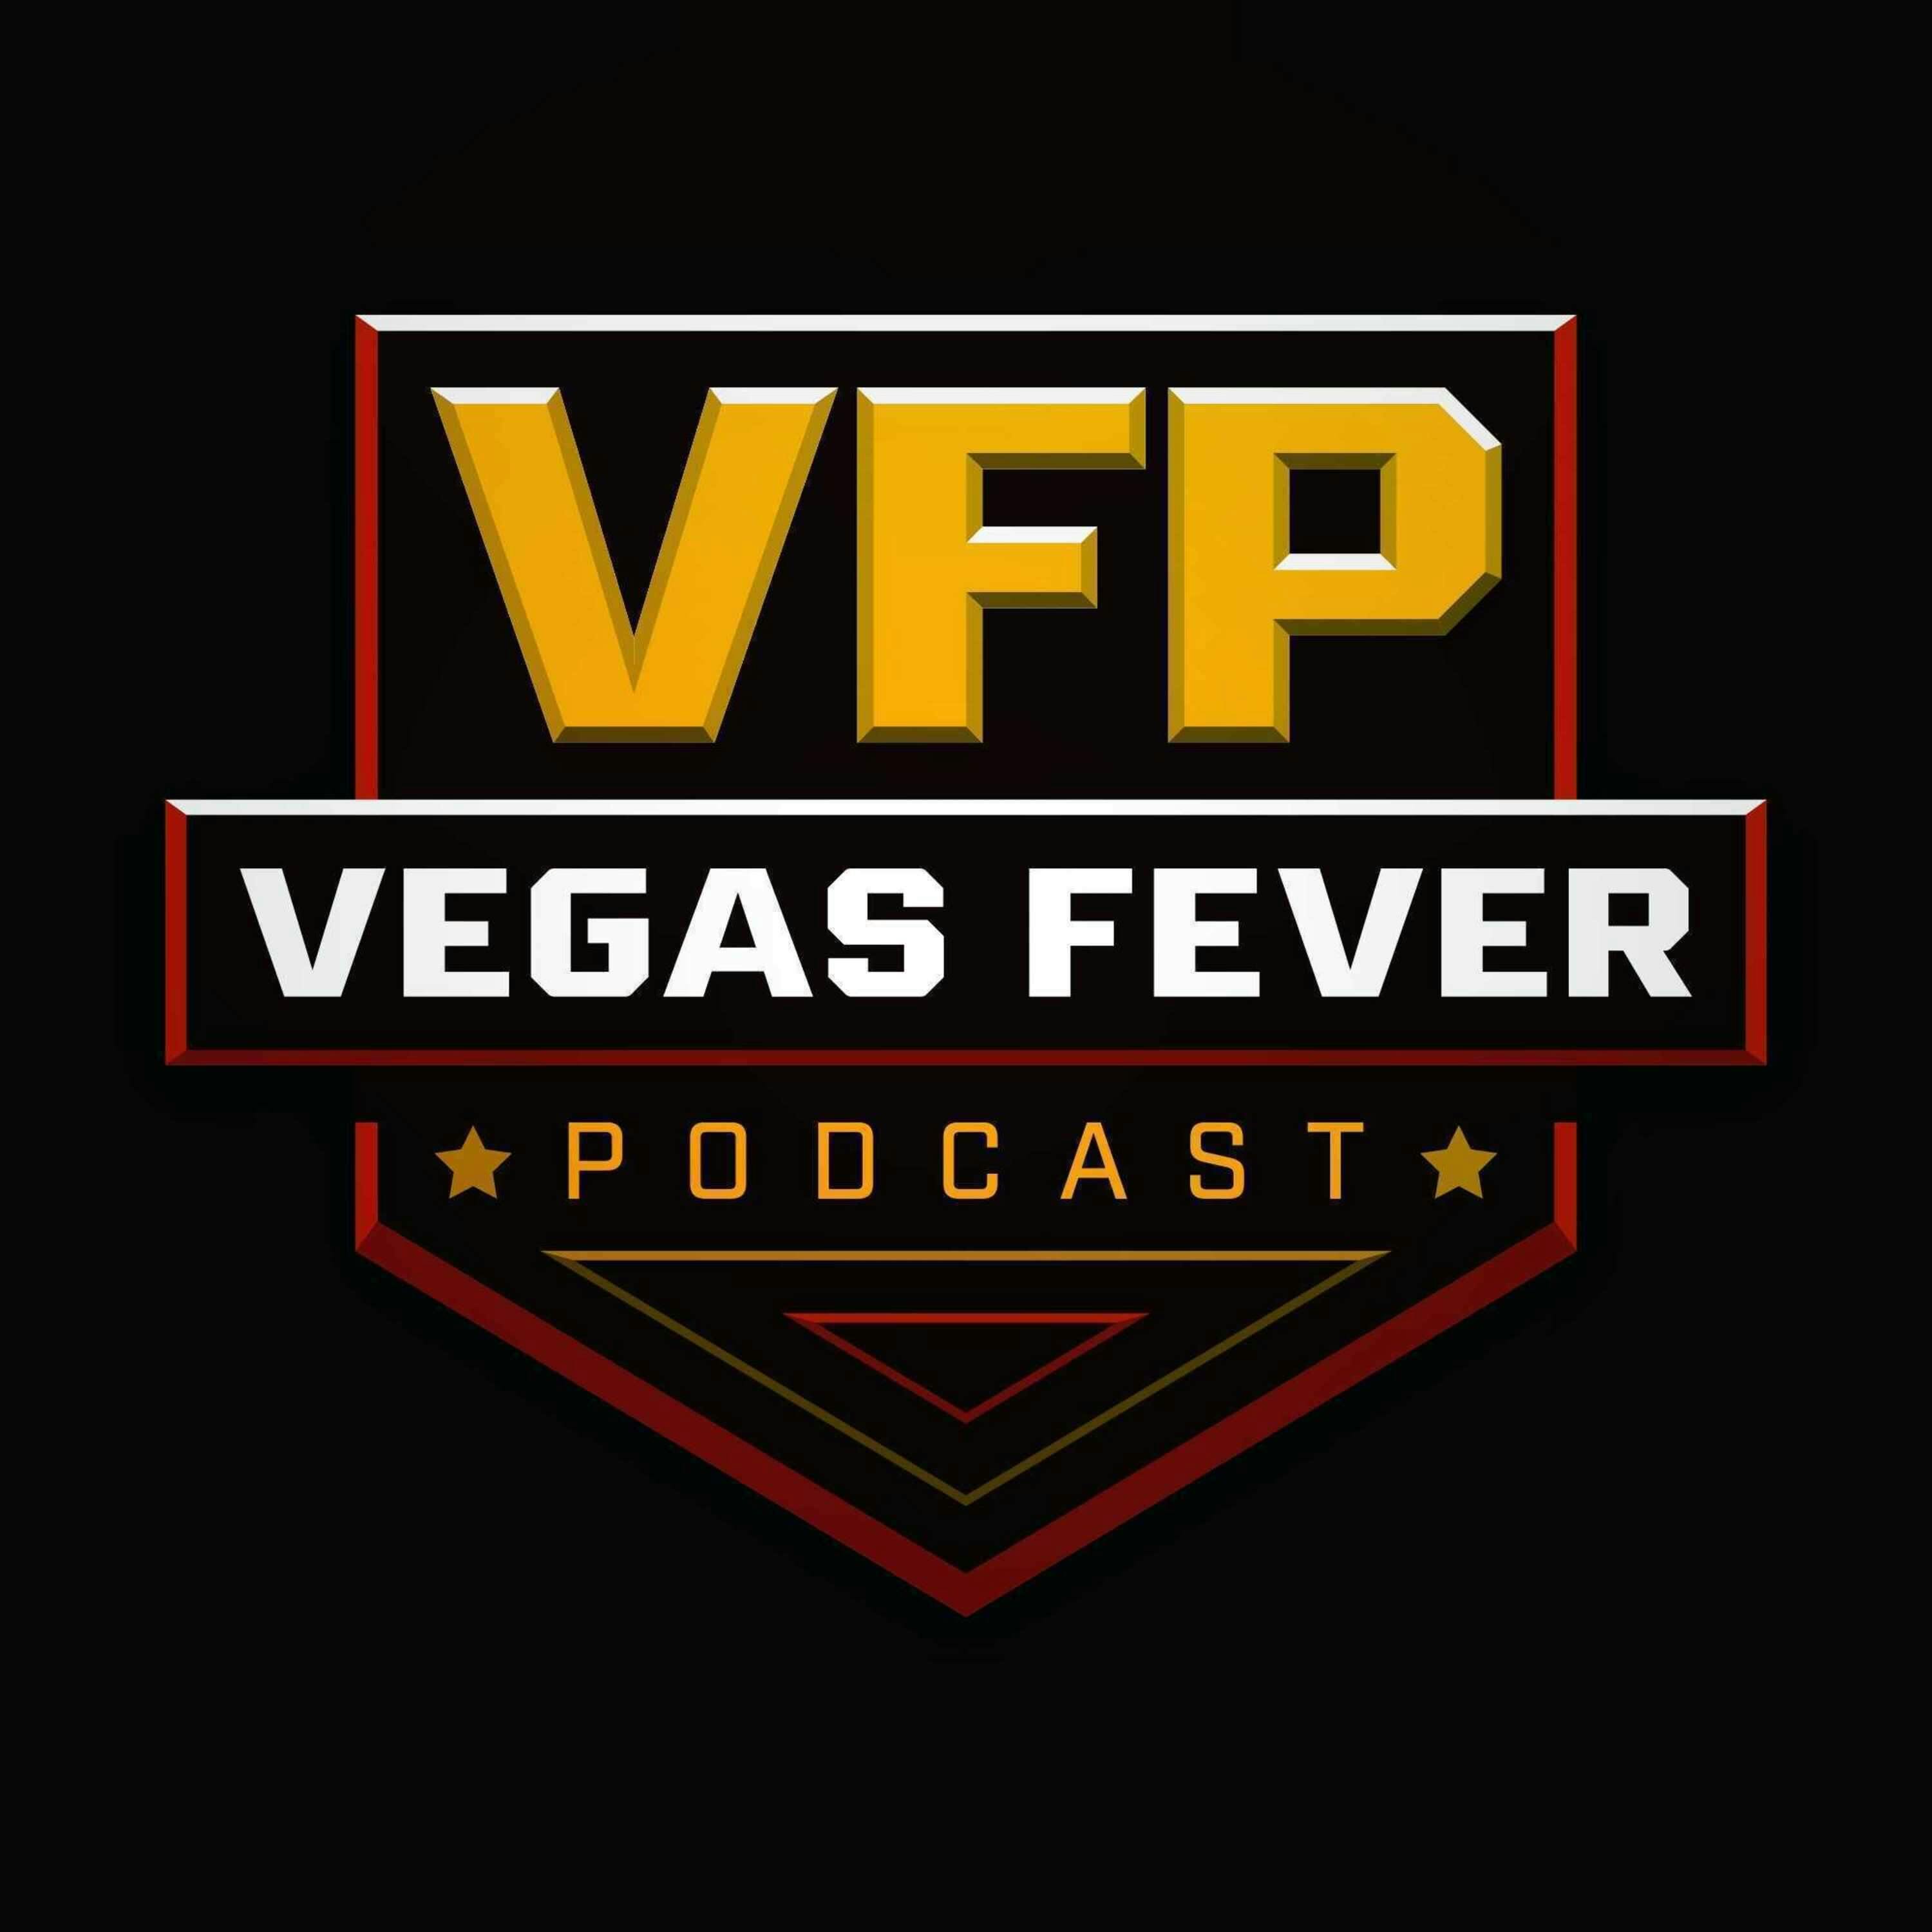 Episode 10- Super Fleury carries the VGK to victories. UNLV struggles in Boise.